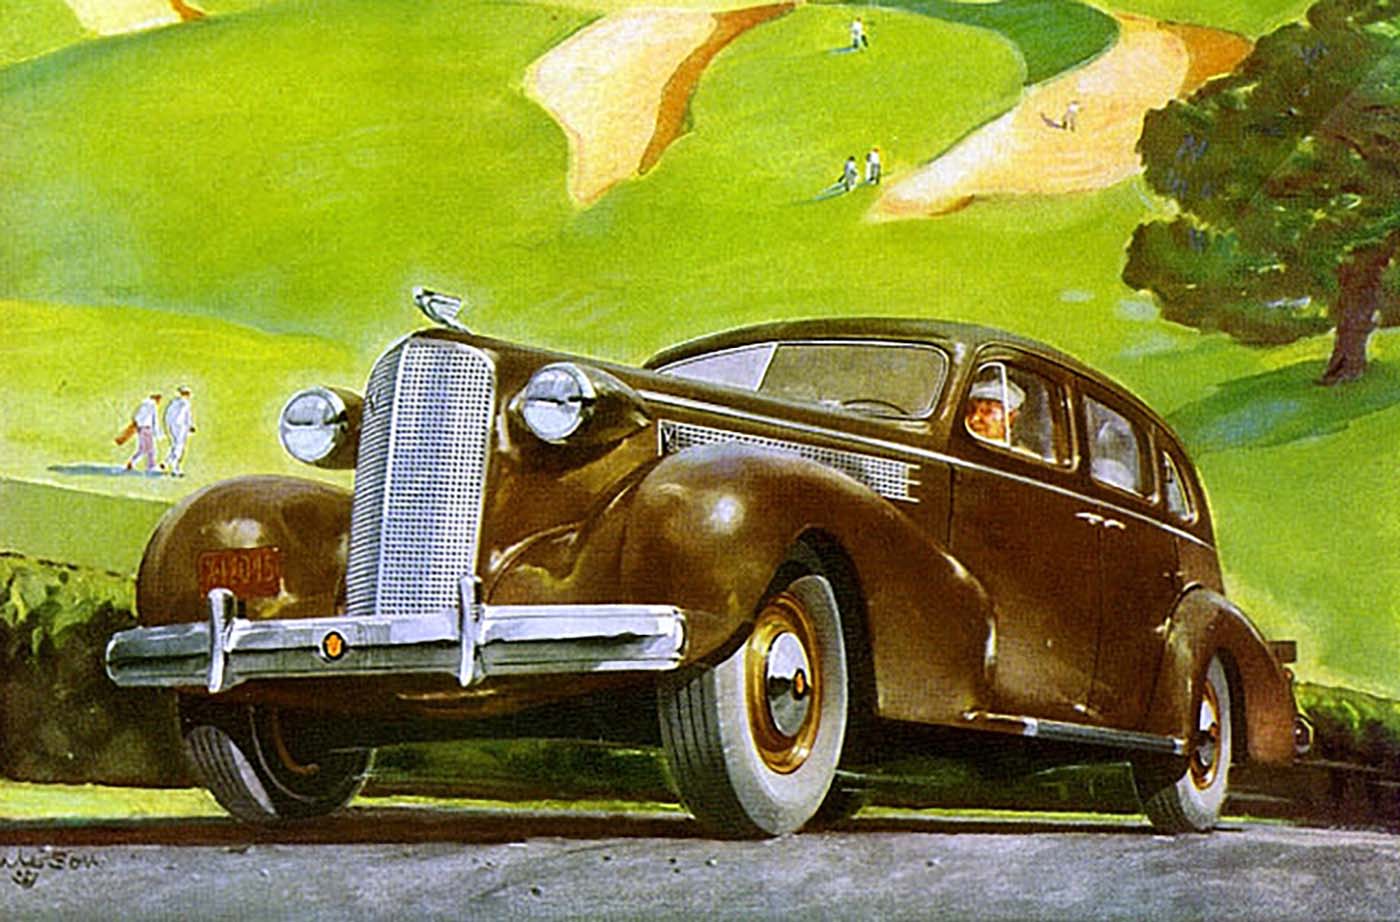 Stunning Vintage Automobile Ads from the 1900s to 1950s